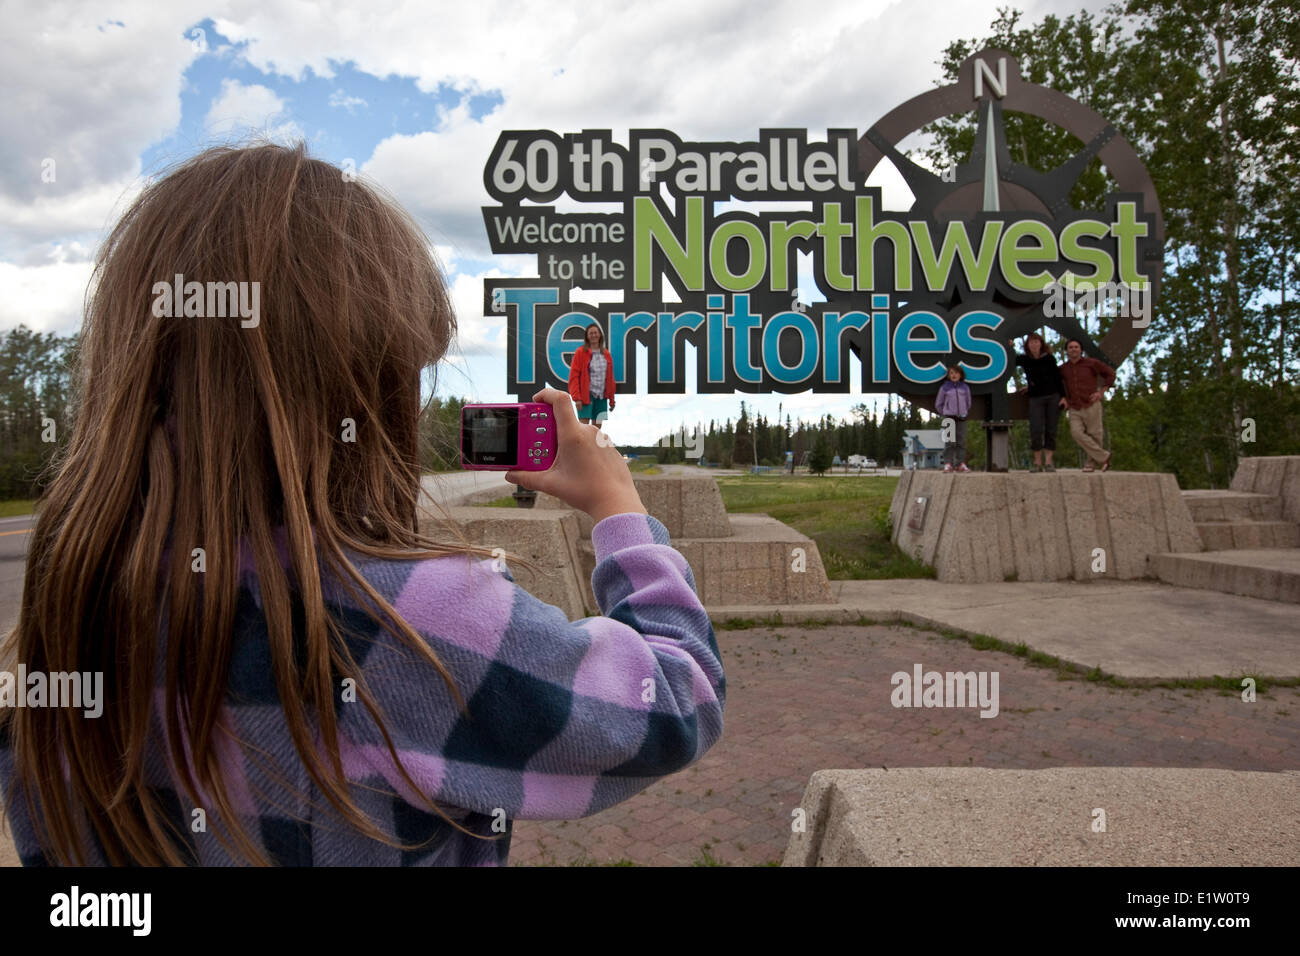 Young girl photographs family at the 60th Parallel border of the Northwest Territories, Canada. Stock Photo